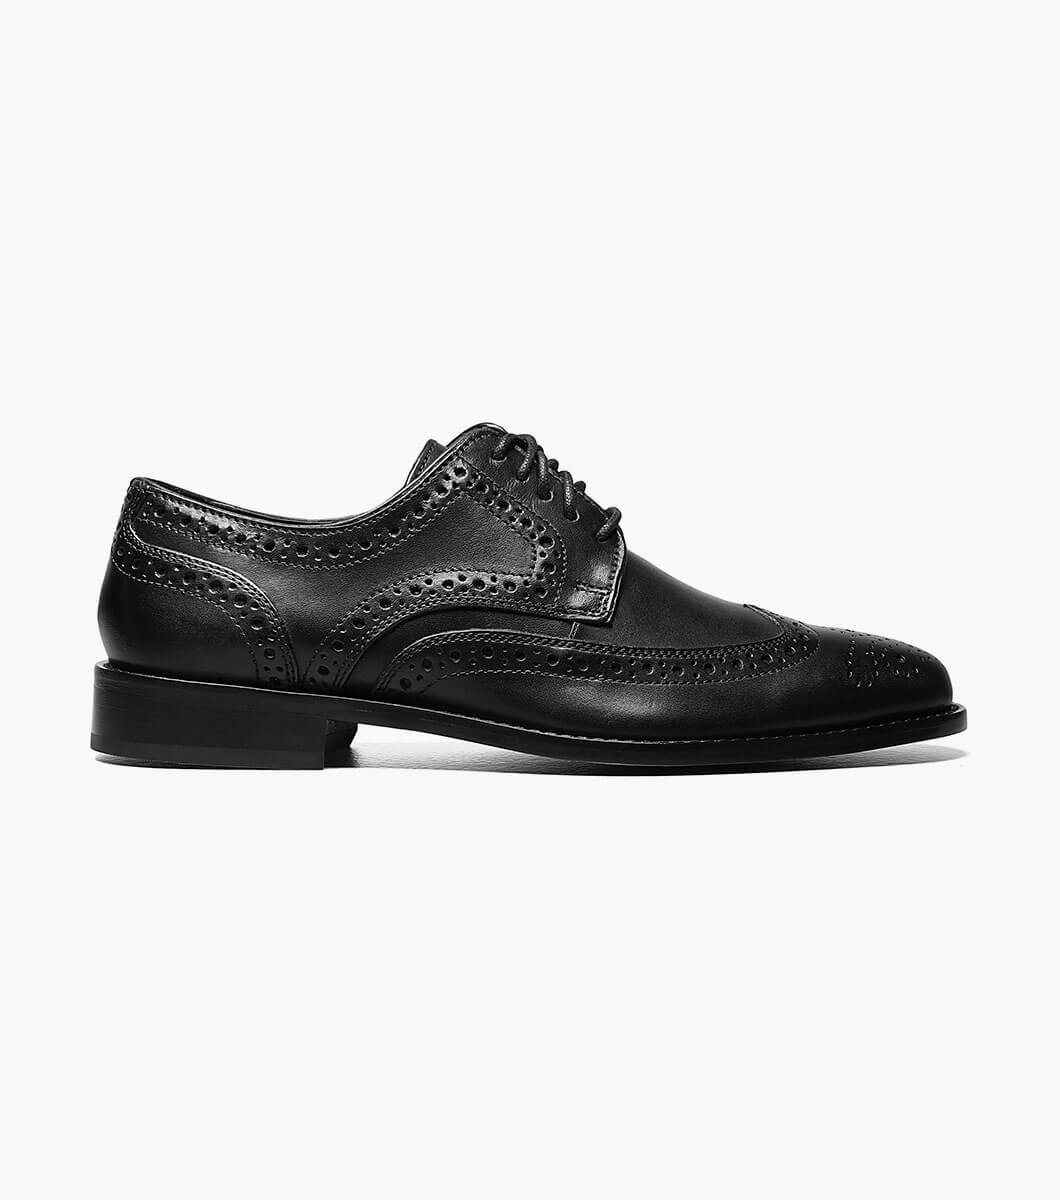 Nunn Bush Men's Shoes Nelson Black Leather Wing Tip Oxford Lace Up 84525-001 